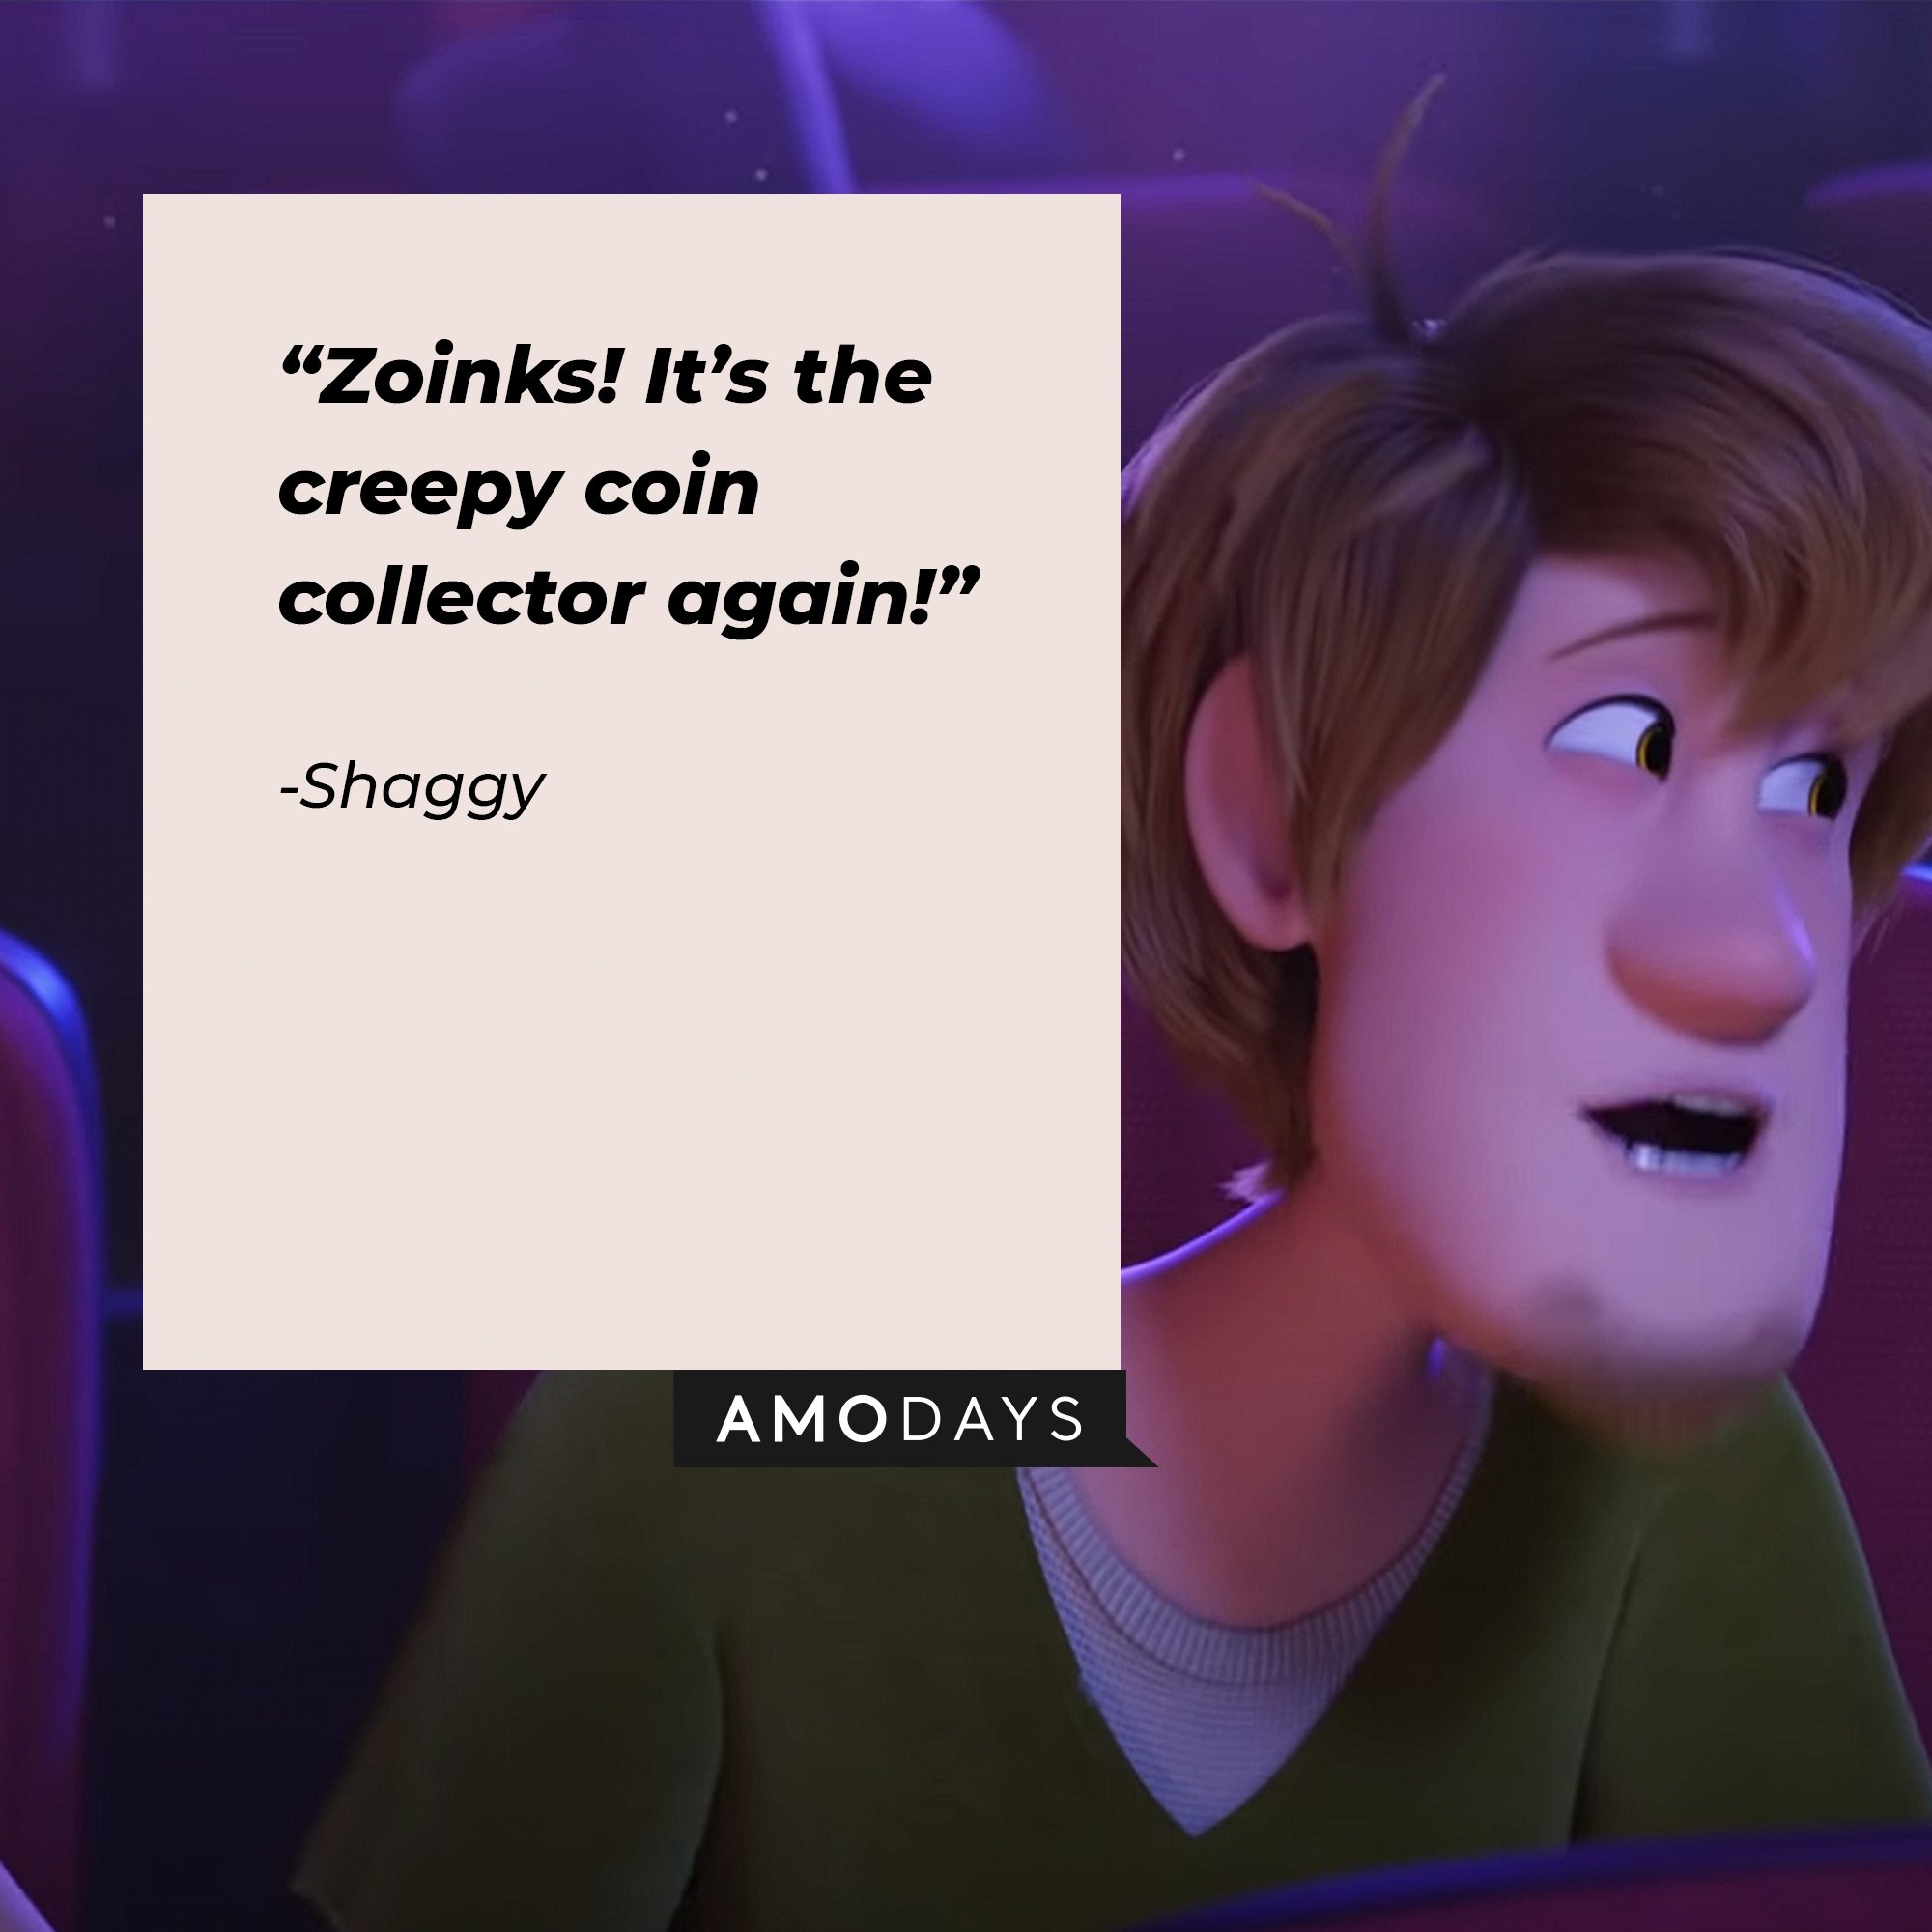  Shaggy's quote: “Zoinks! It’s the creepy coin collector again!” | Image: AmoDays